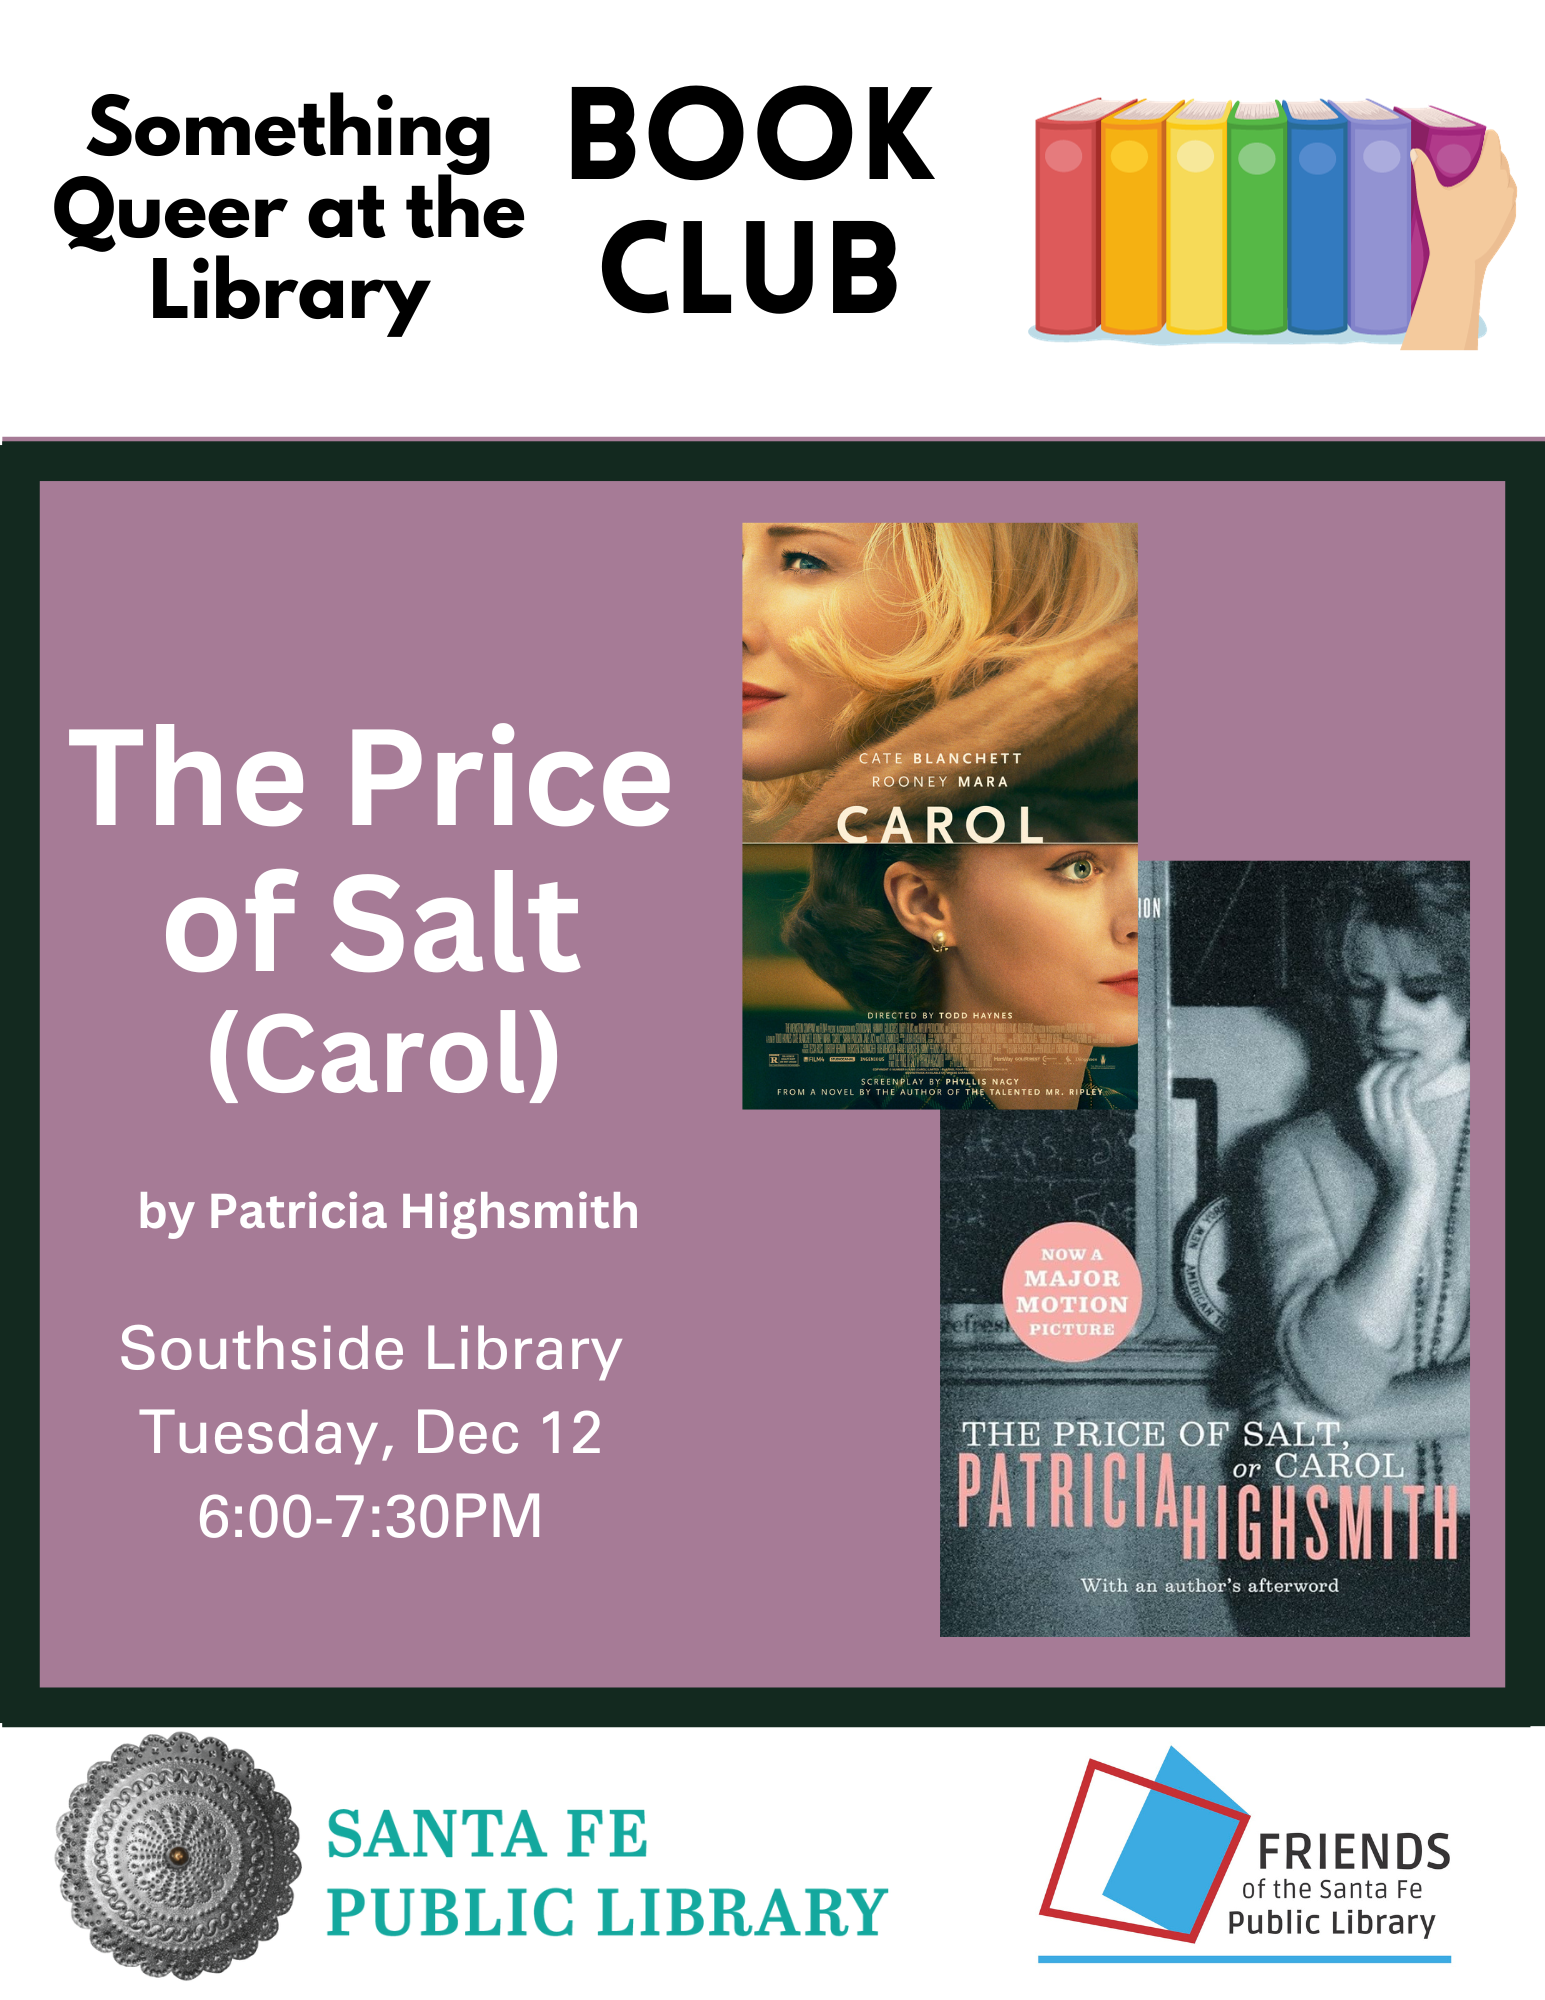 Event Flyer for the film Carol and the book The Price of Salt.  Pensive women dressed in mid-century fashion